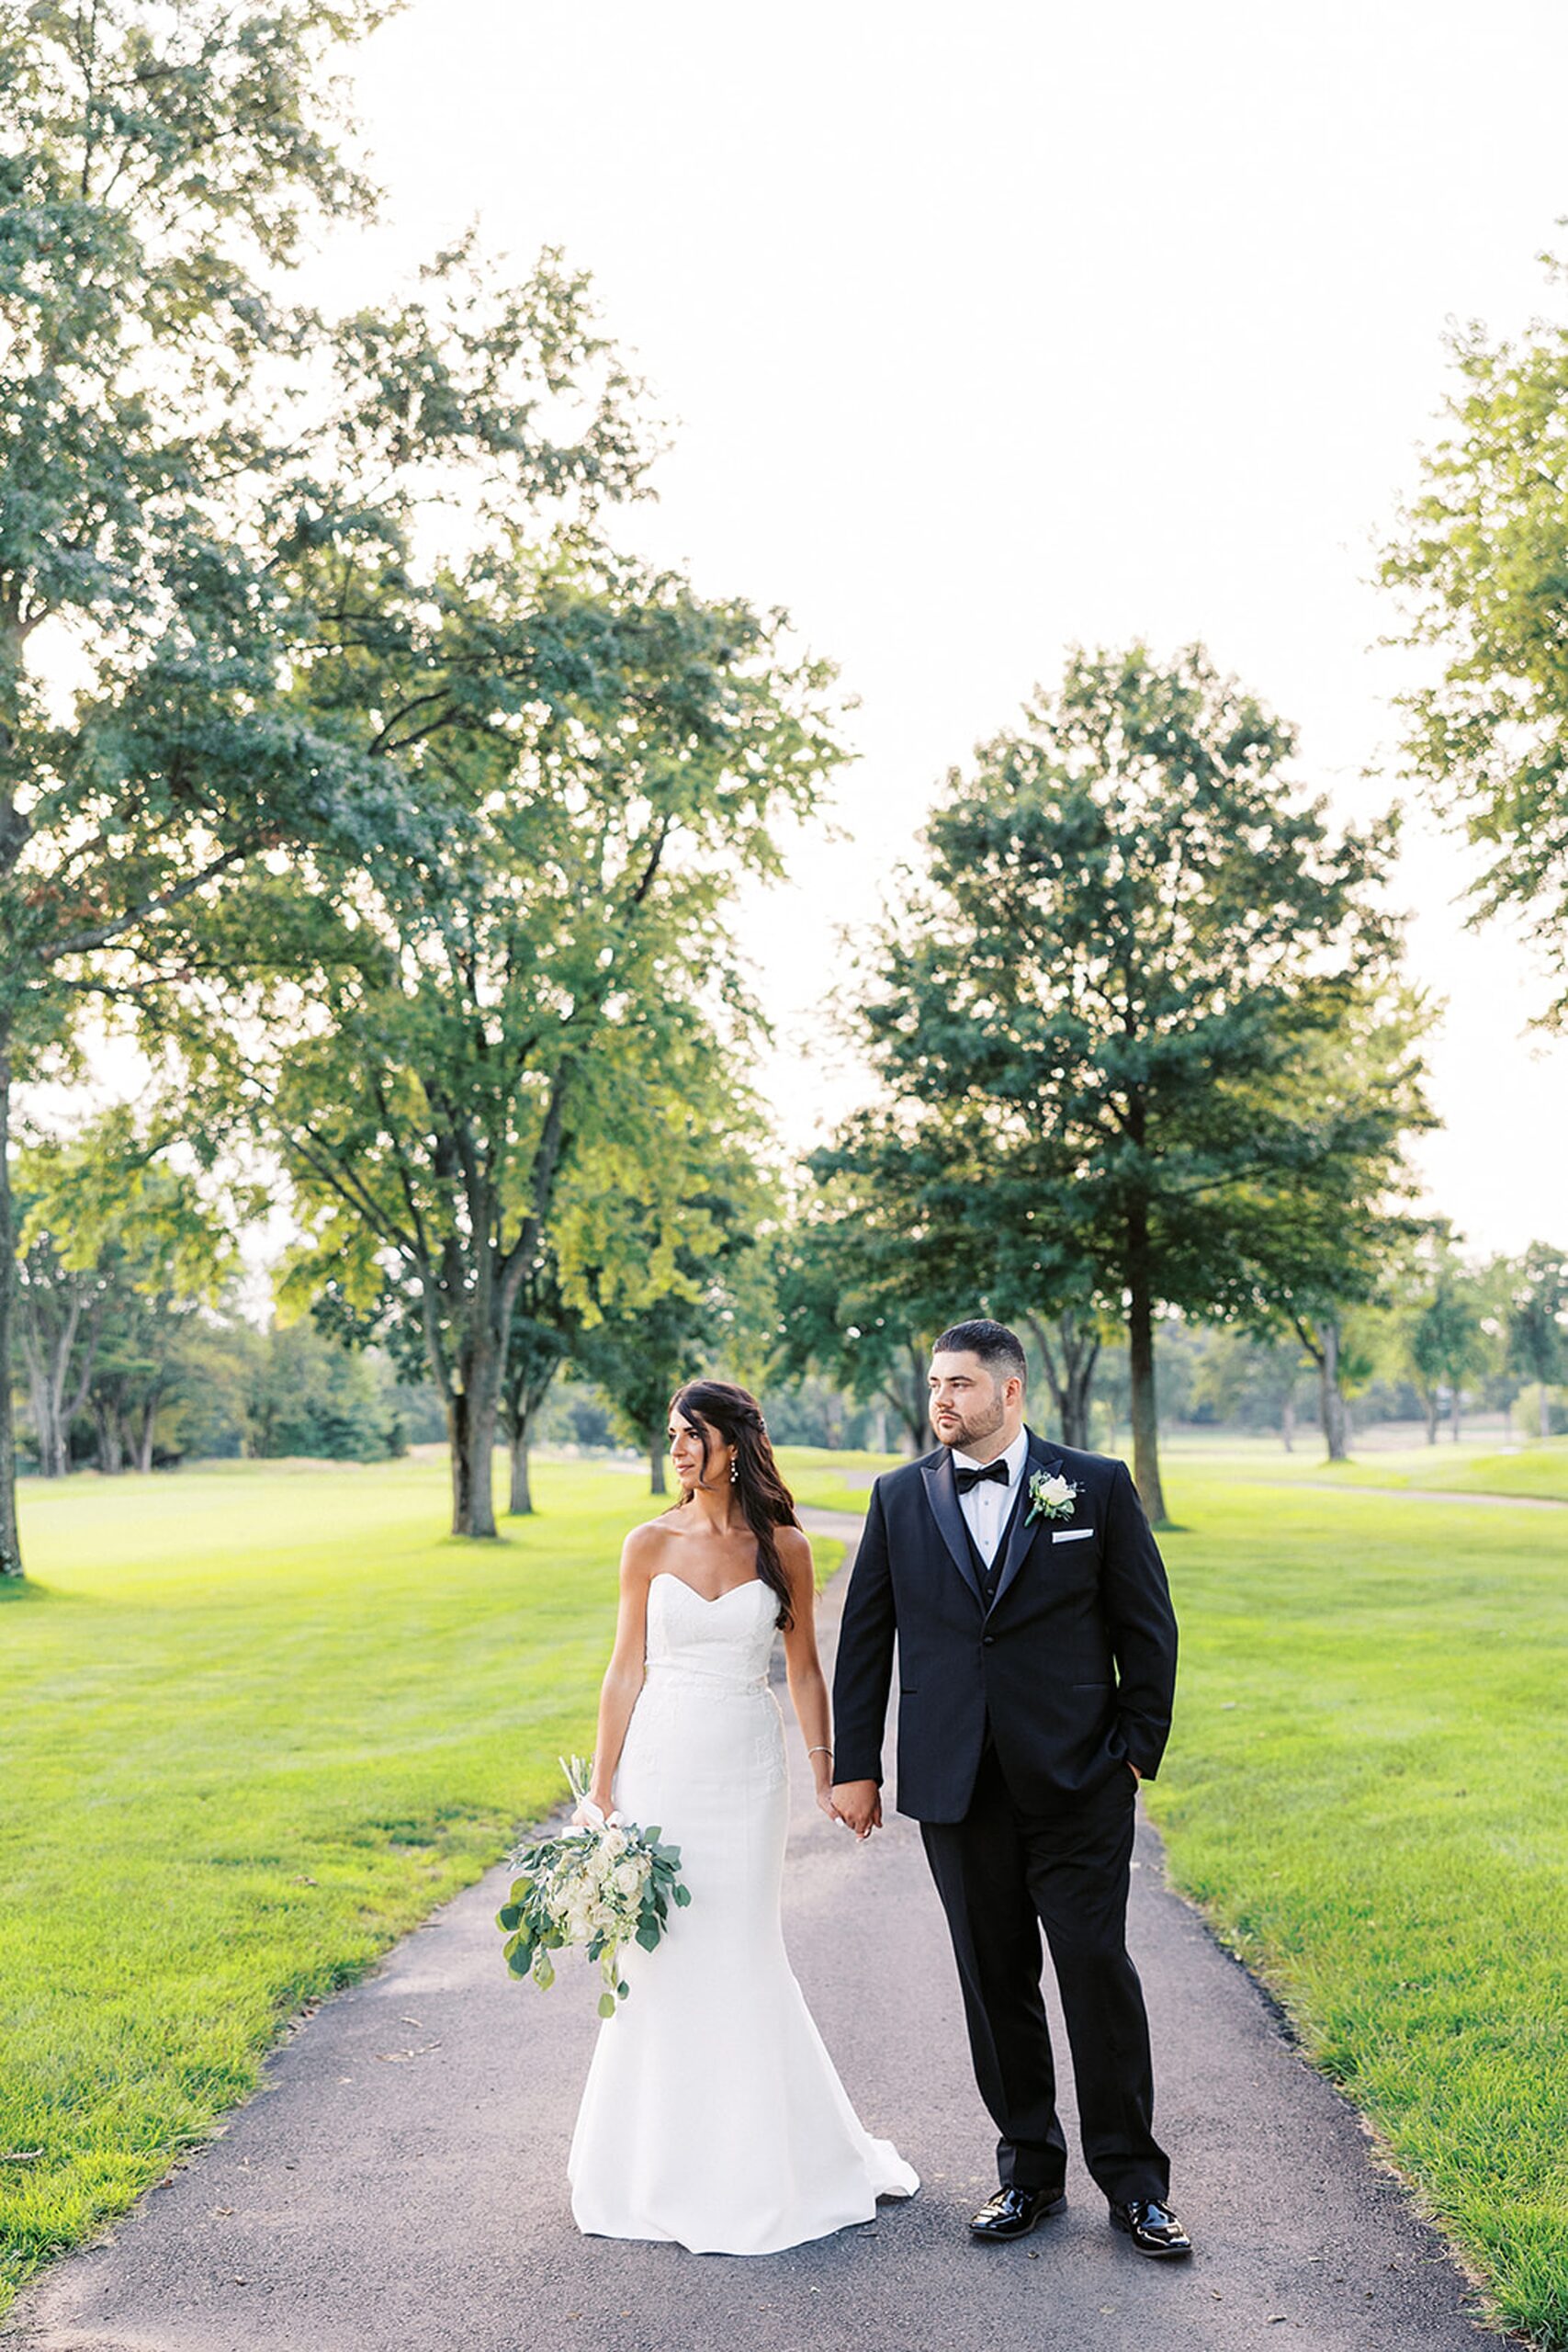 Newlyweds hold hands while walking down a paved walkway in a golf course